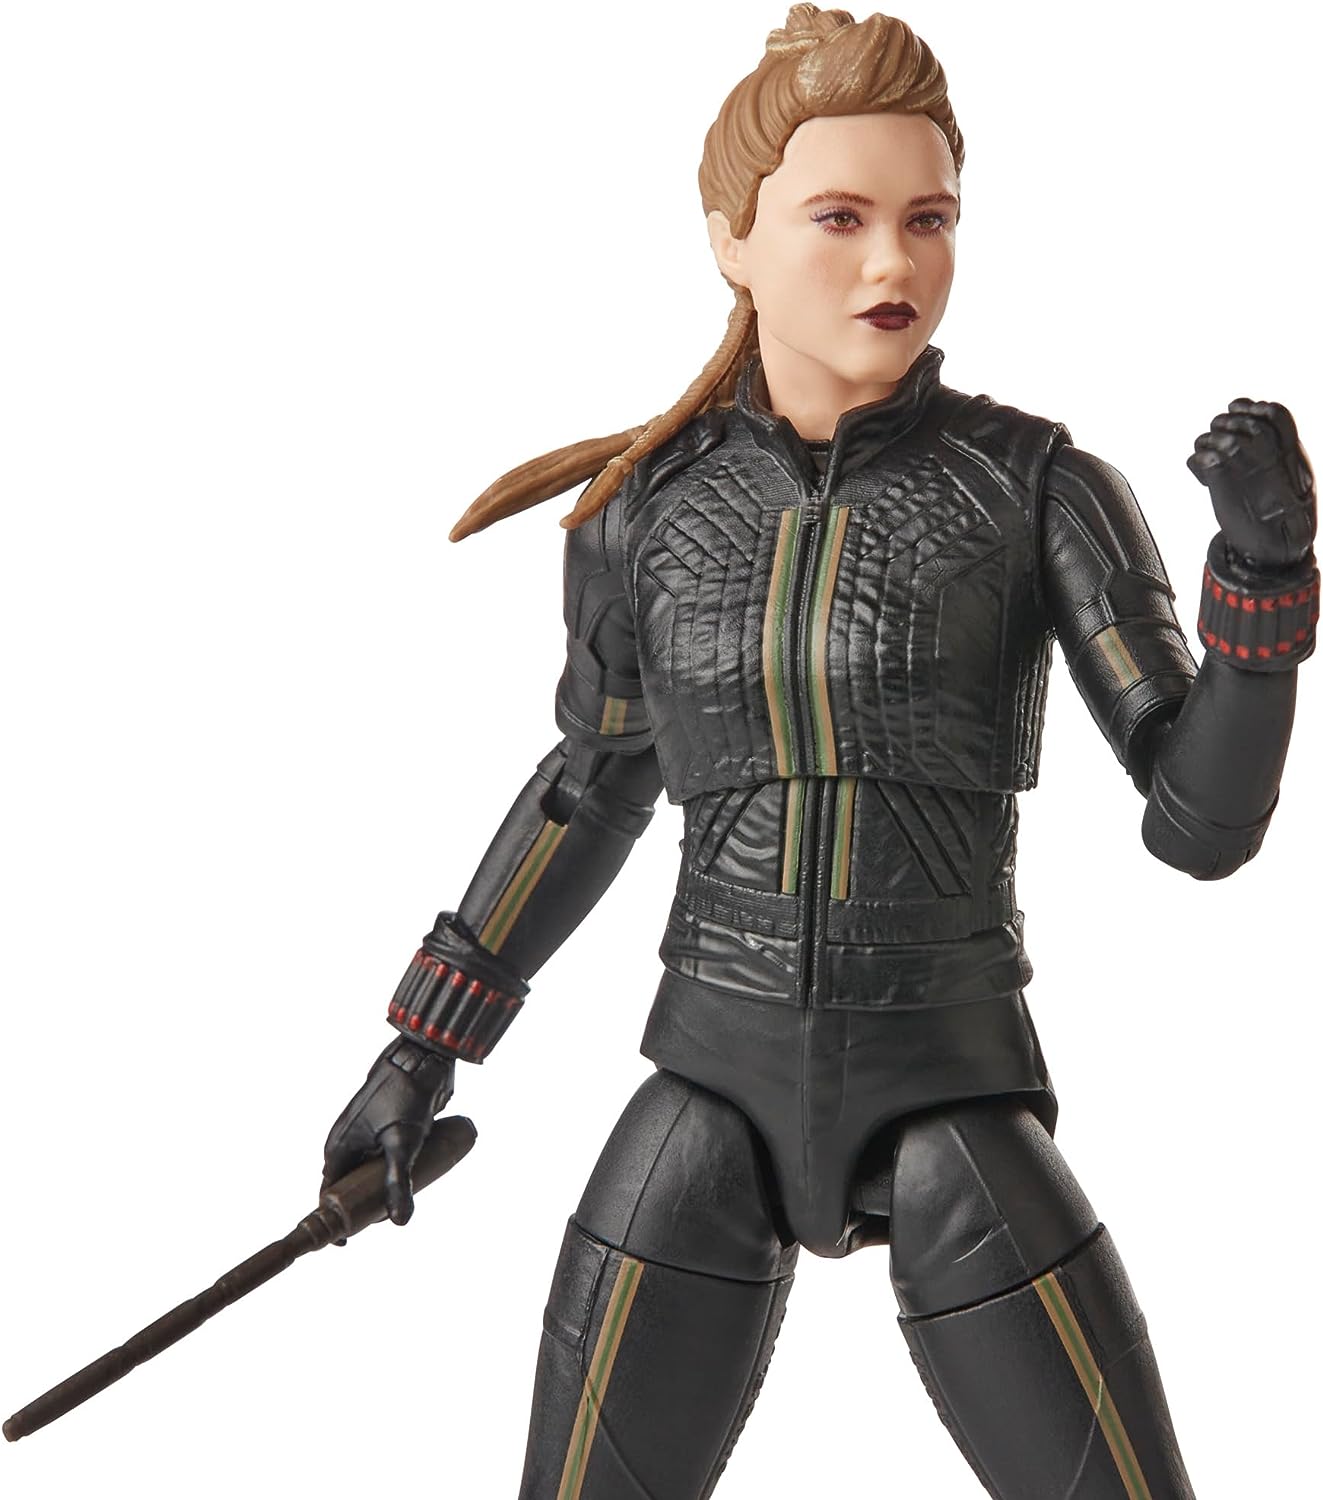 Marvel Legends Series Yelena Belova, Hawkeye Collectible 6-Inch Action Figures, Ages 4 and Up 